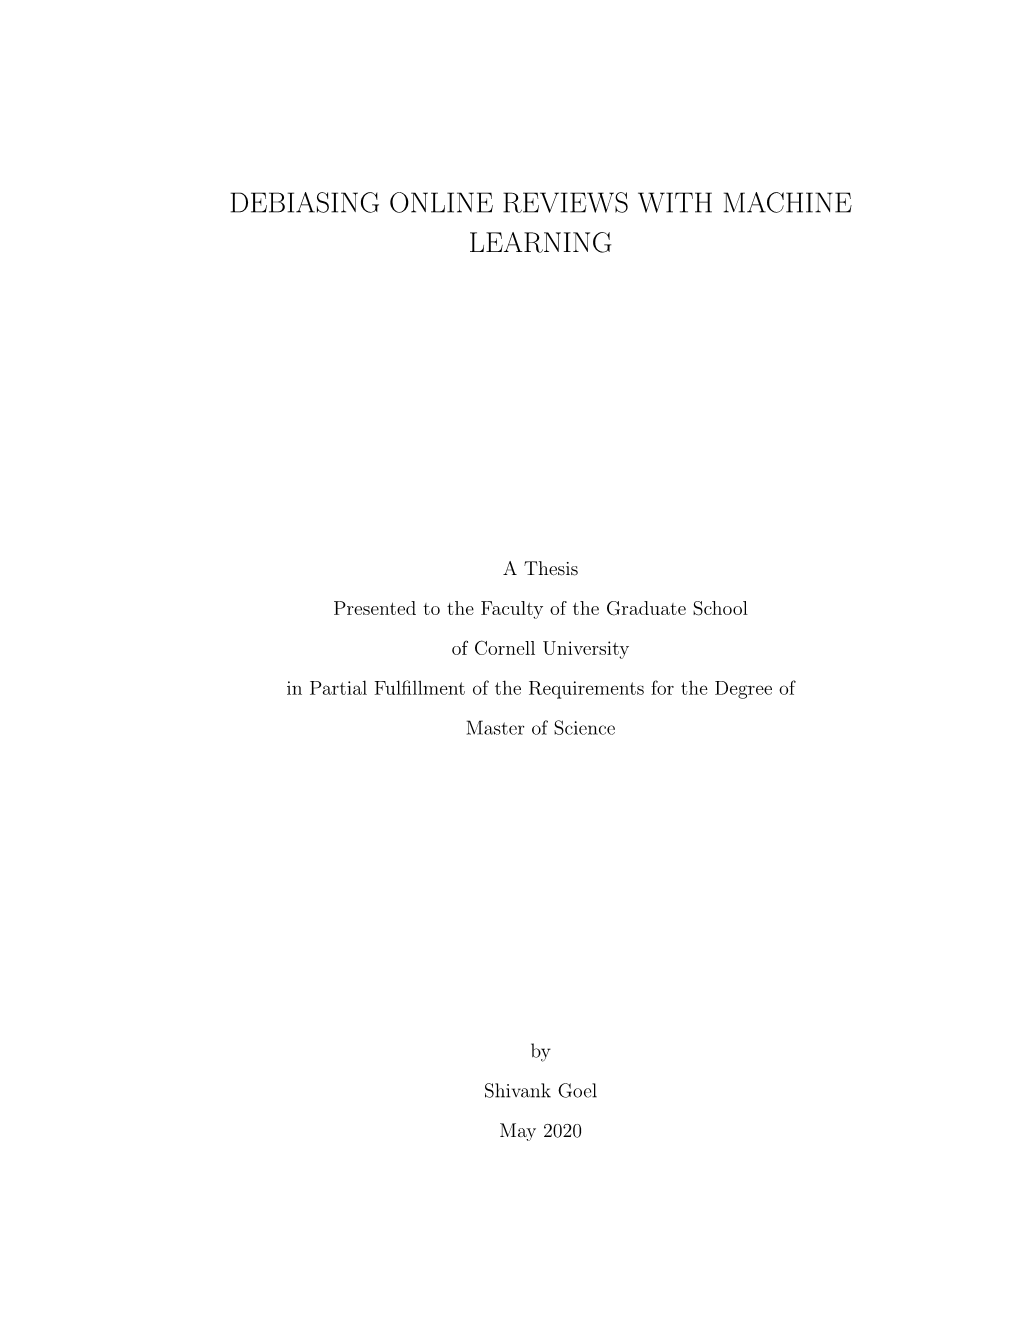 Debiasing Online Reviews with Machine Learning